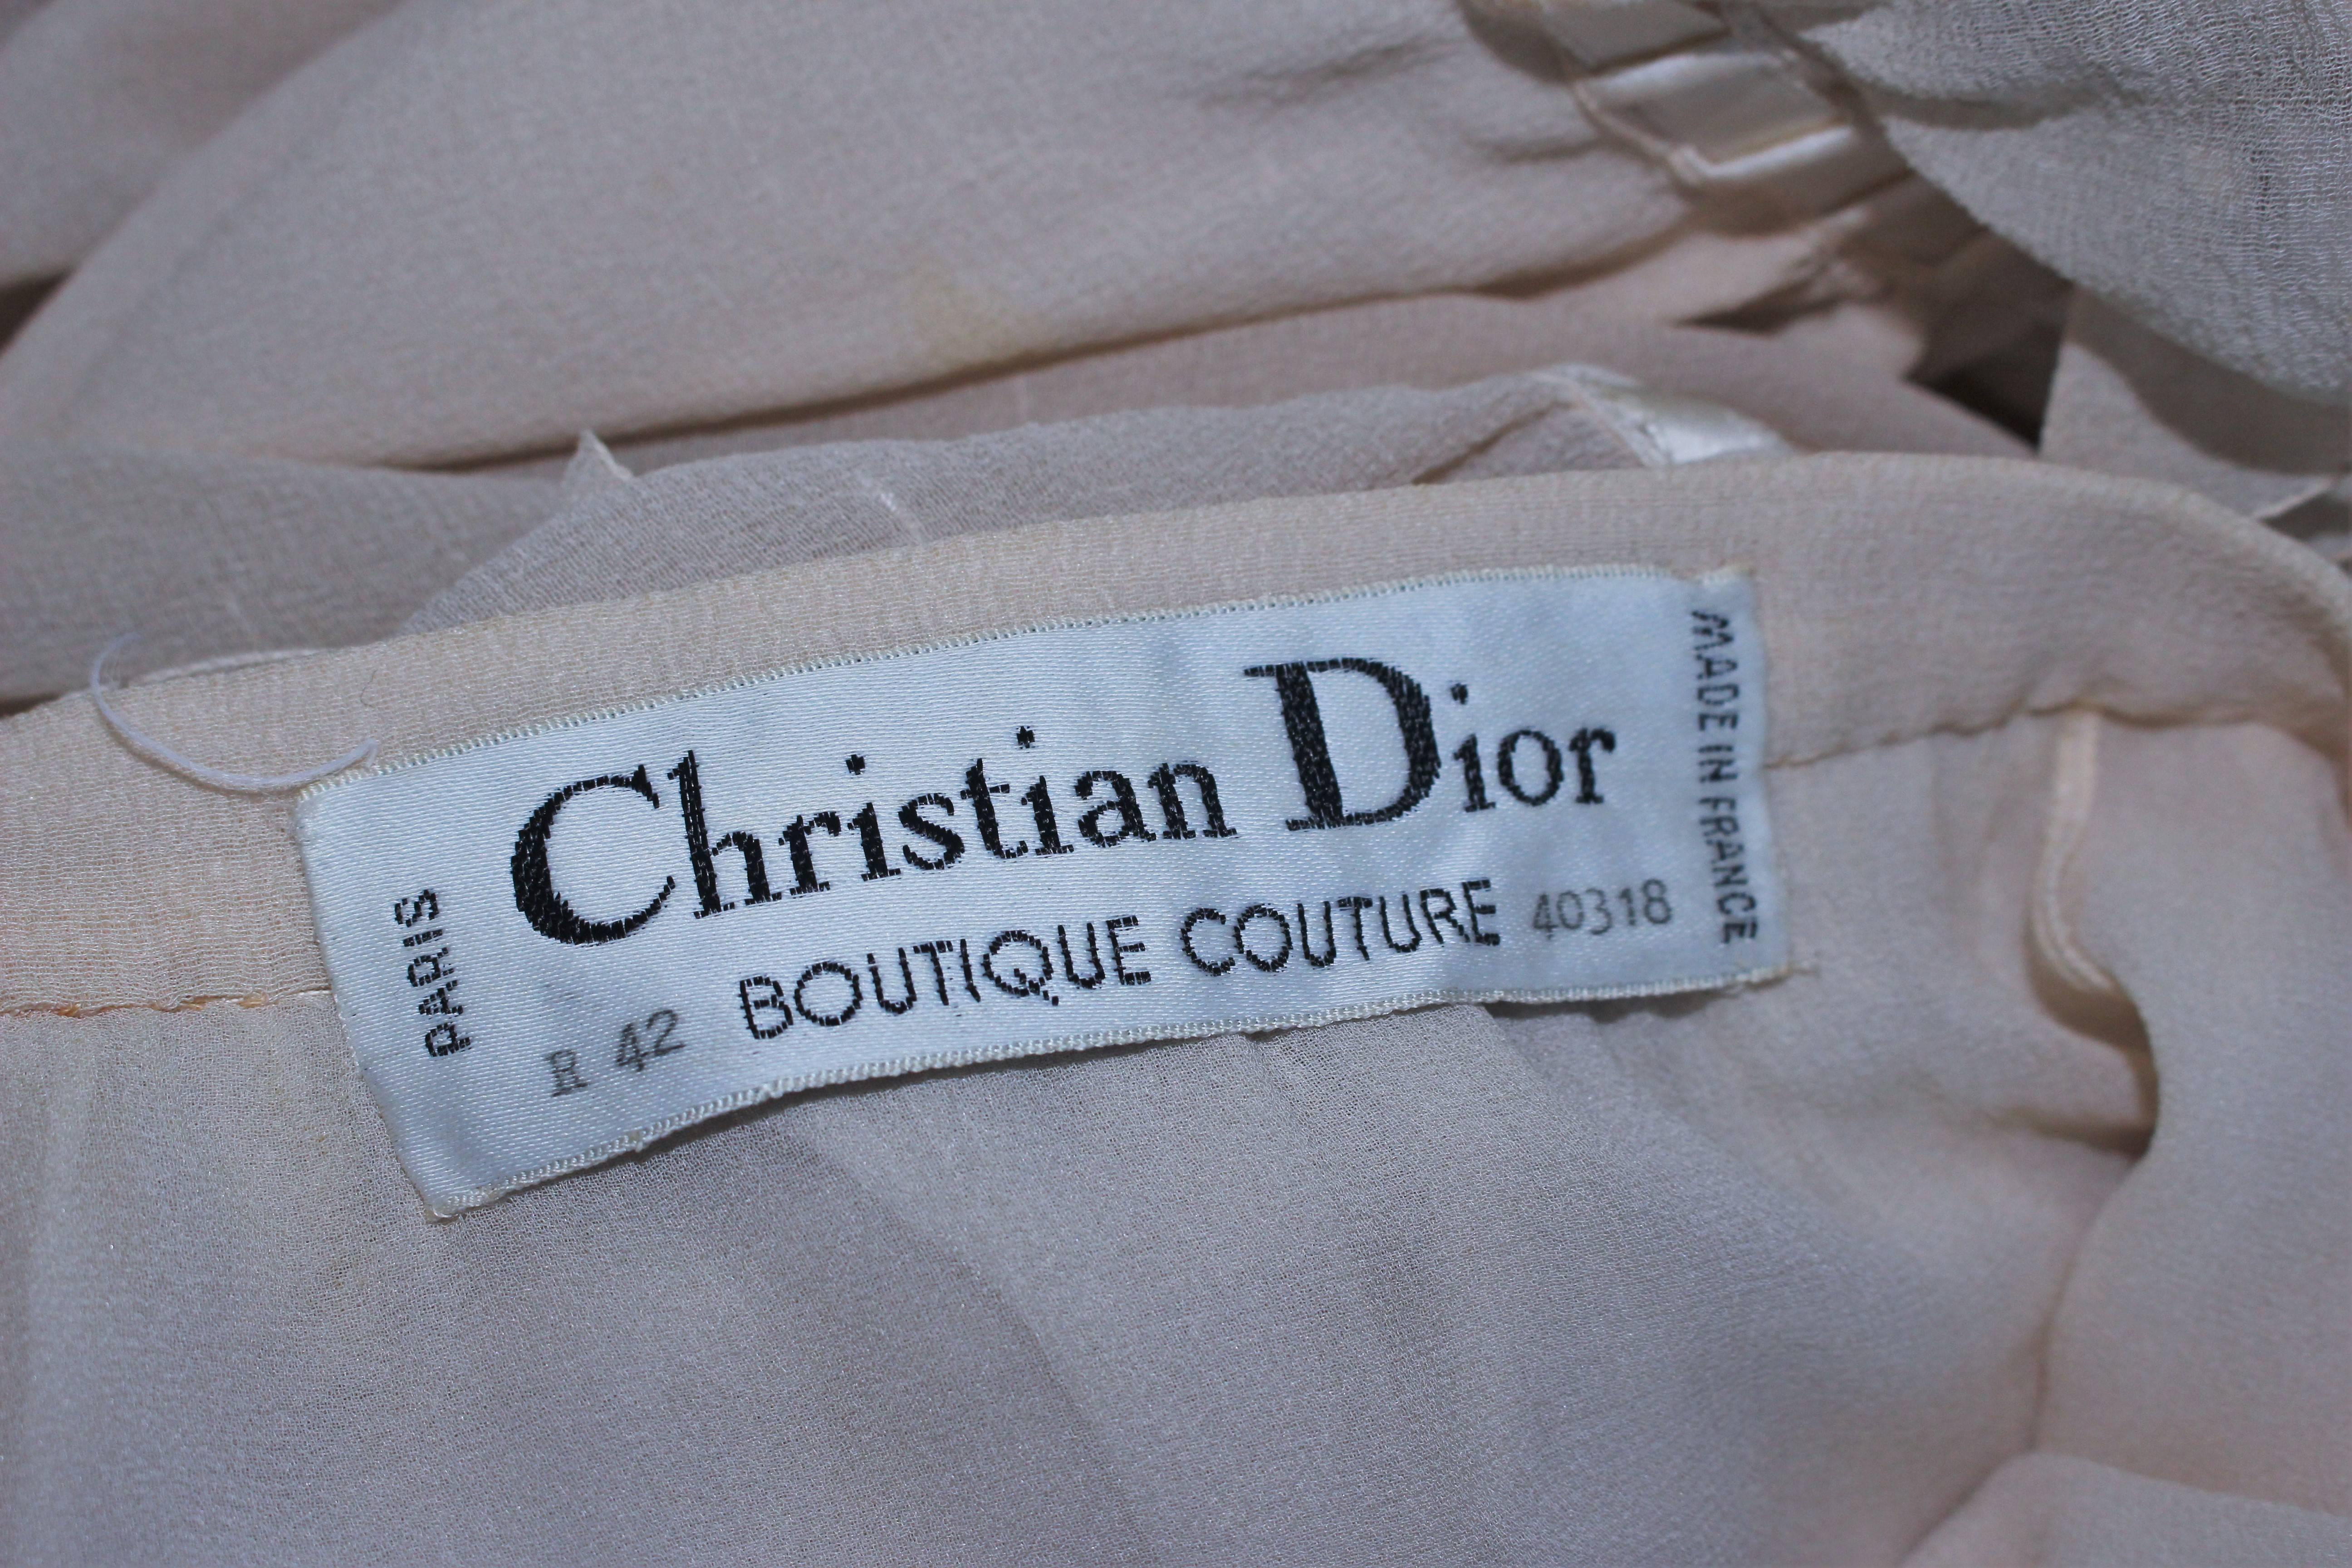 CHRISTIAN DIOR COUTURE Betsy Bloomingdale Silk Chiffon Skirt & Blouse Set Size 2 For Sale 4